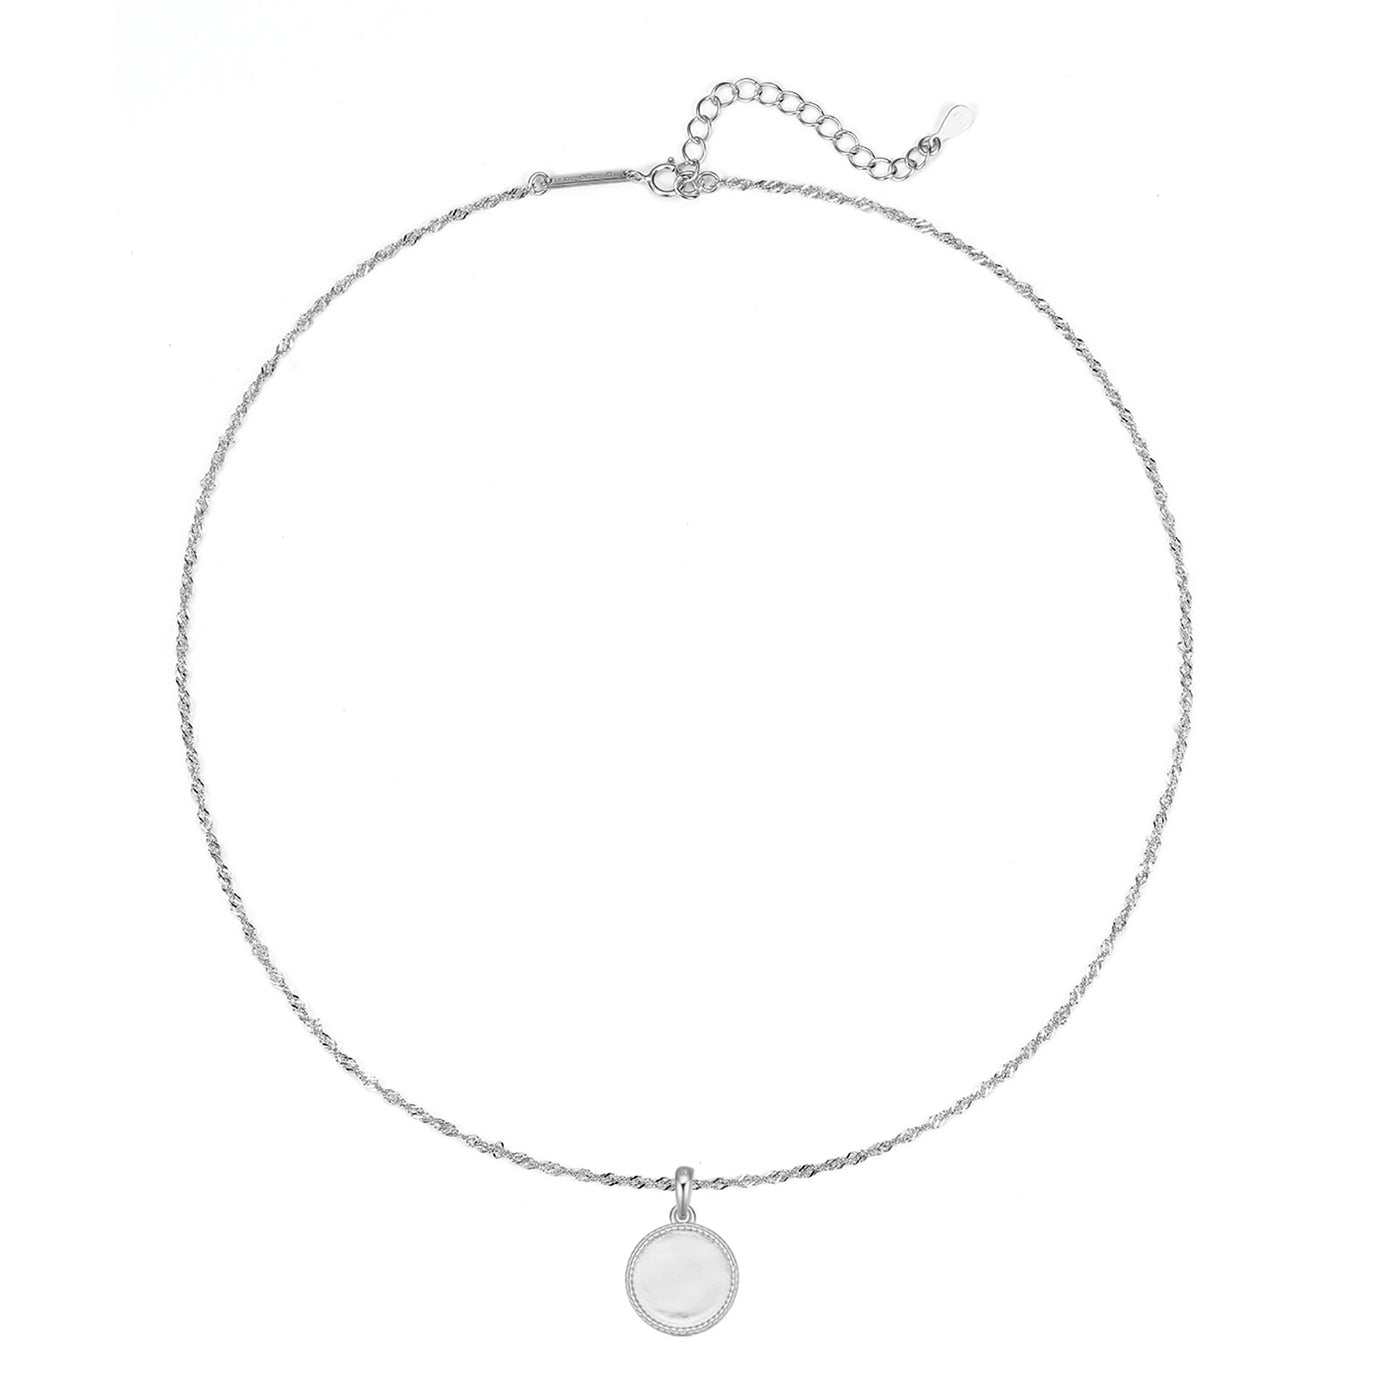 Round Rope Pendant Necklace Sterling Silver